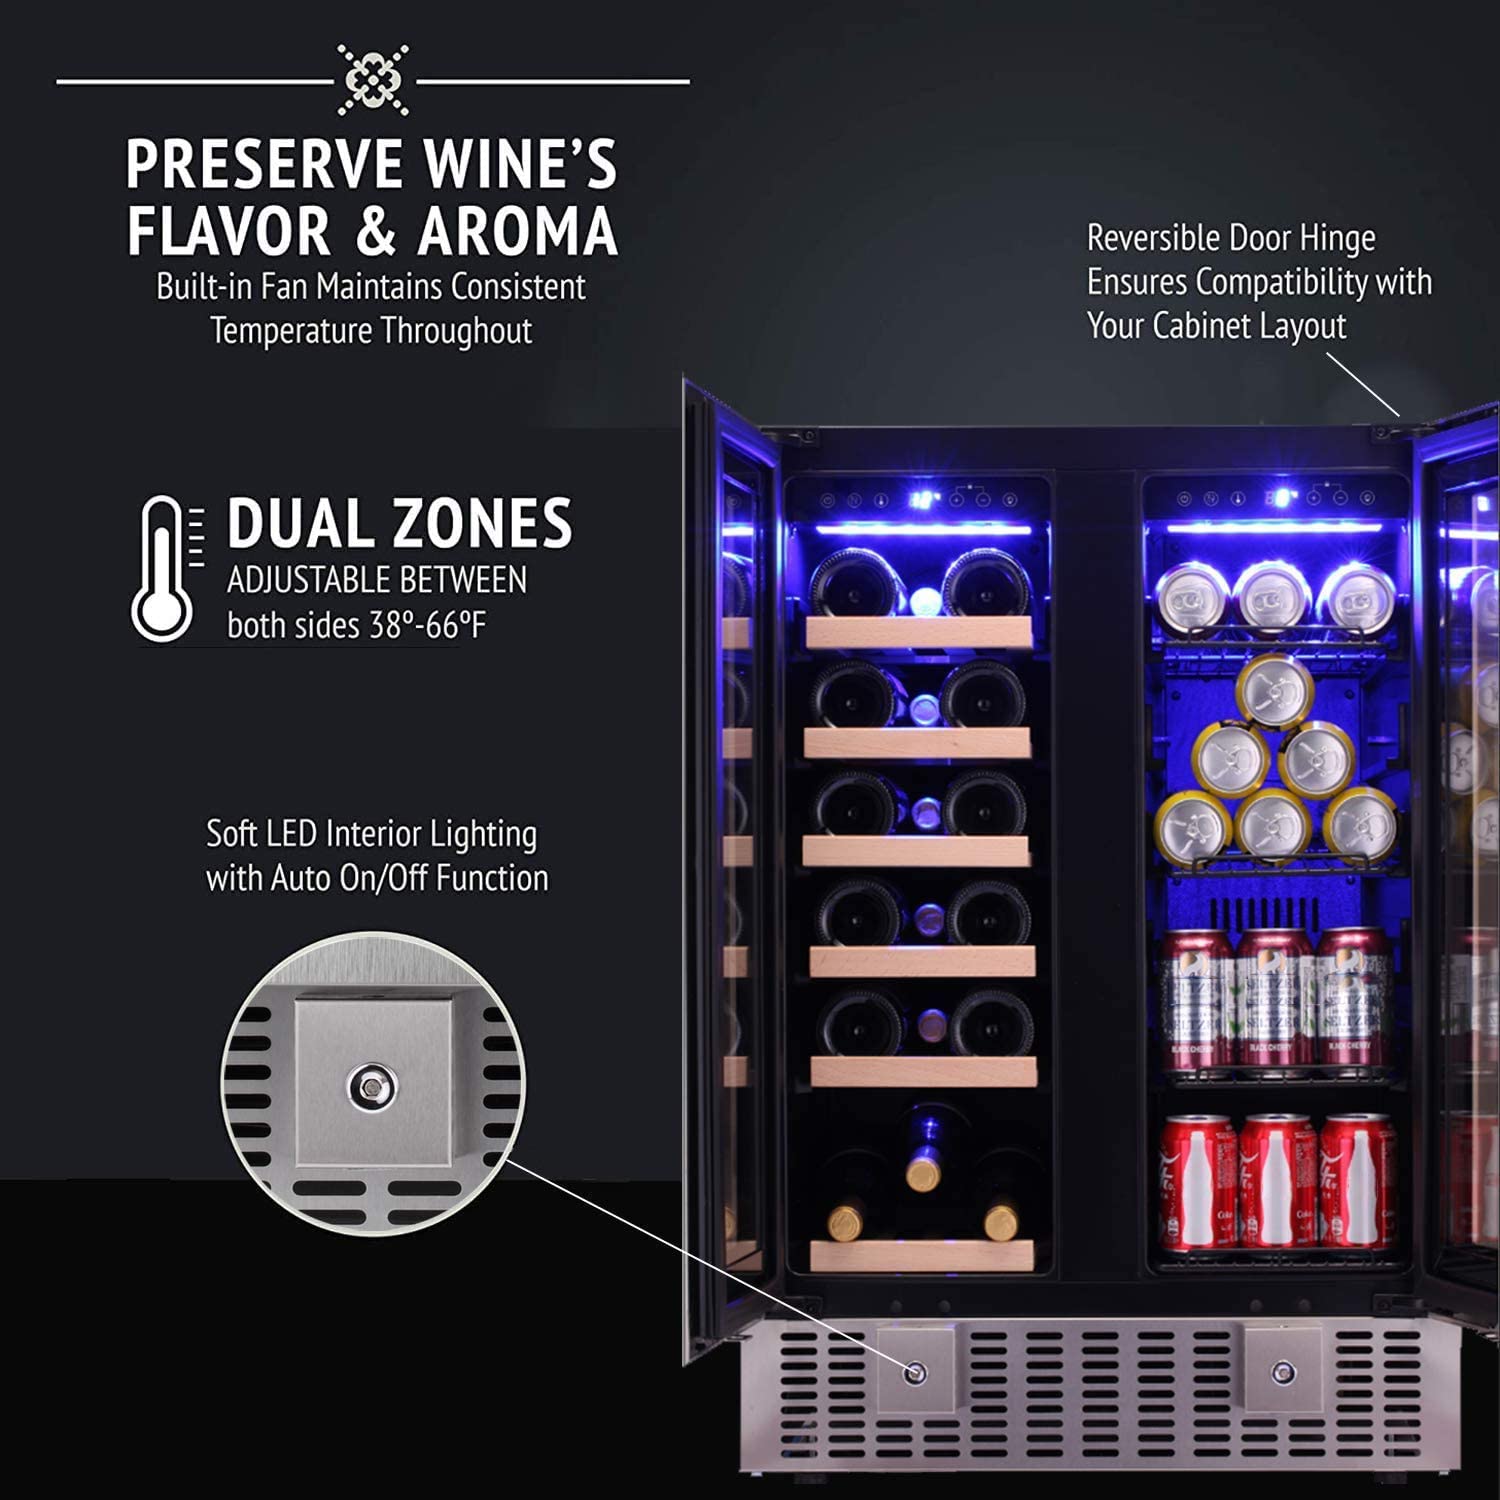 10 Best Countertop Wine Cooler 2022 Review: Small Tabletop Wine Cellar All In One Cooling Gear Lab: Any Refrigerators Air Conditioners Freezers Ice Makers Coolers Fans Reviewed And Compared.